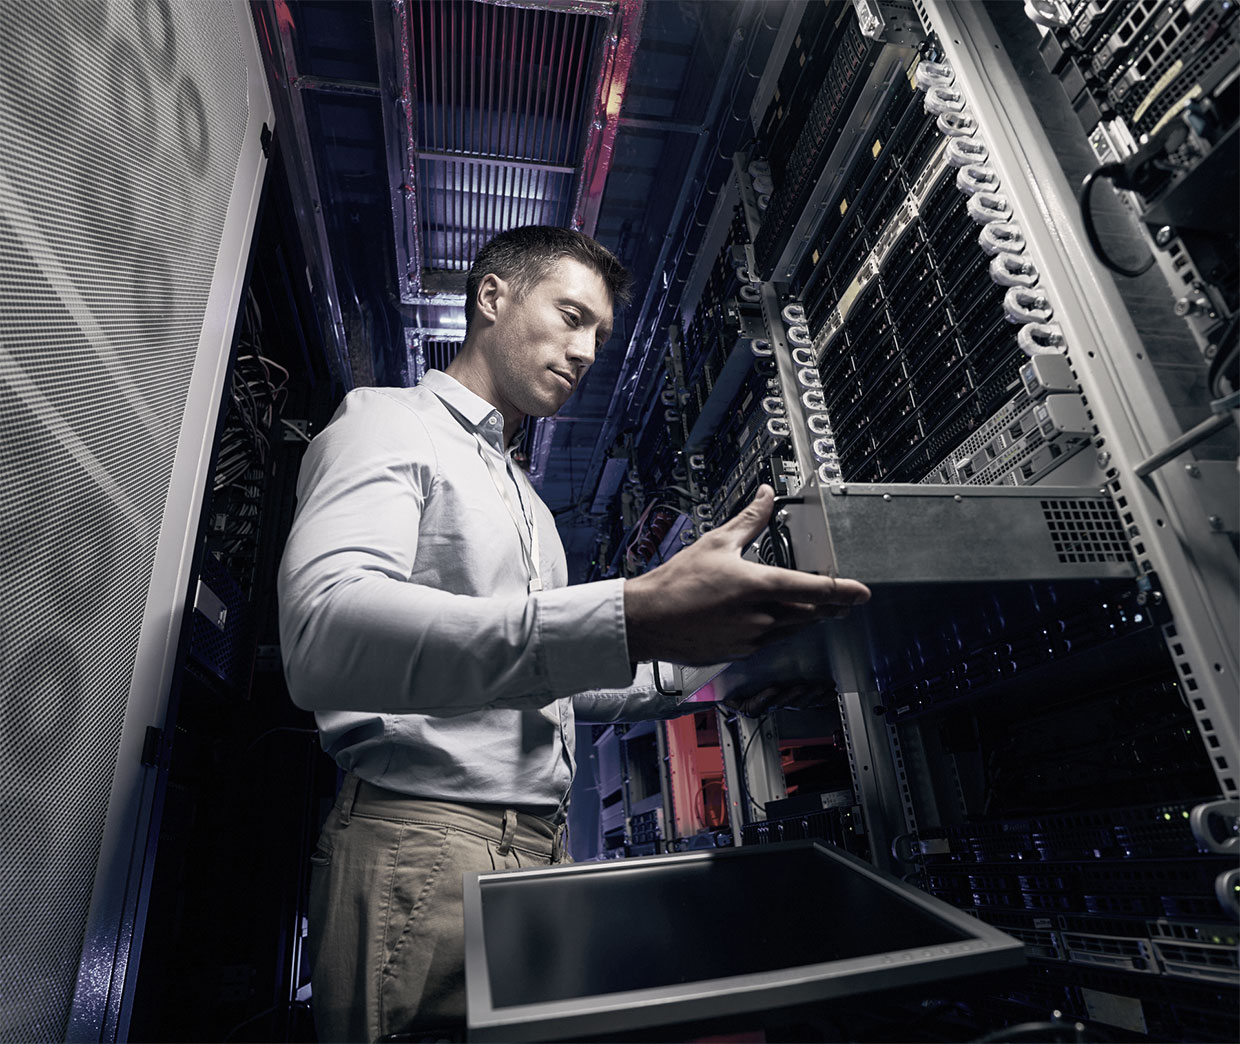 Managed IT services technician servicing datacenter servers